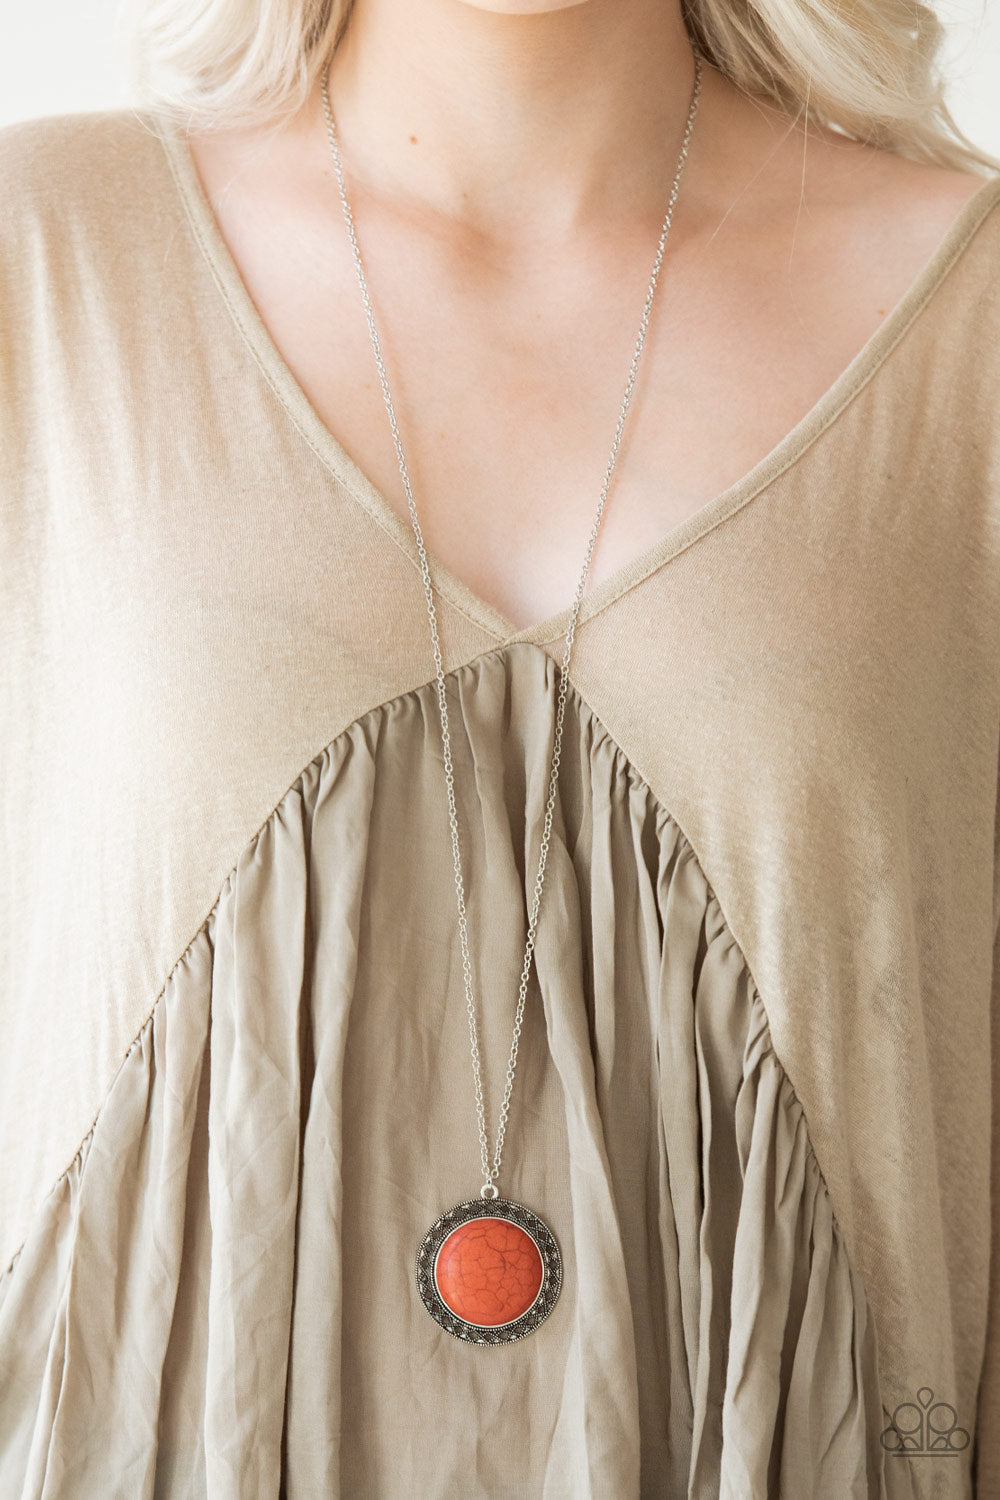 Run Out of Rodeo - orange - Paparazzi necklace